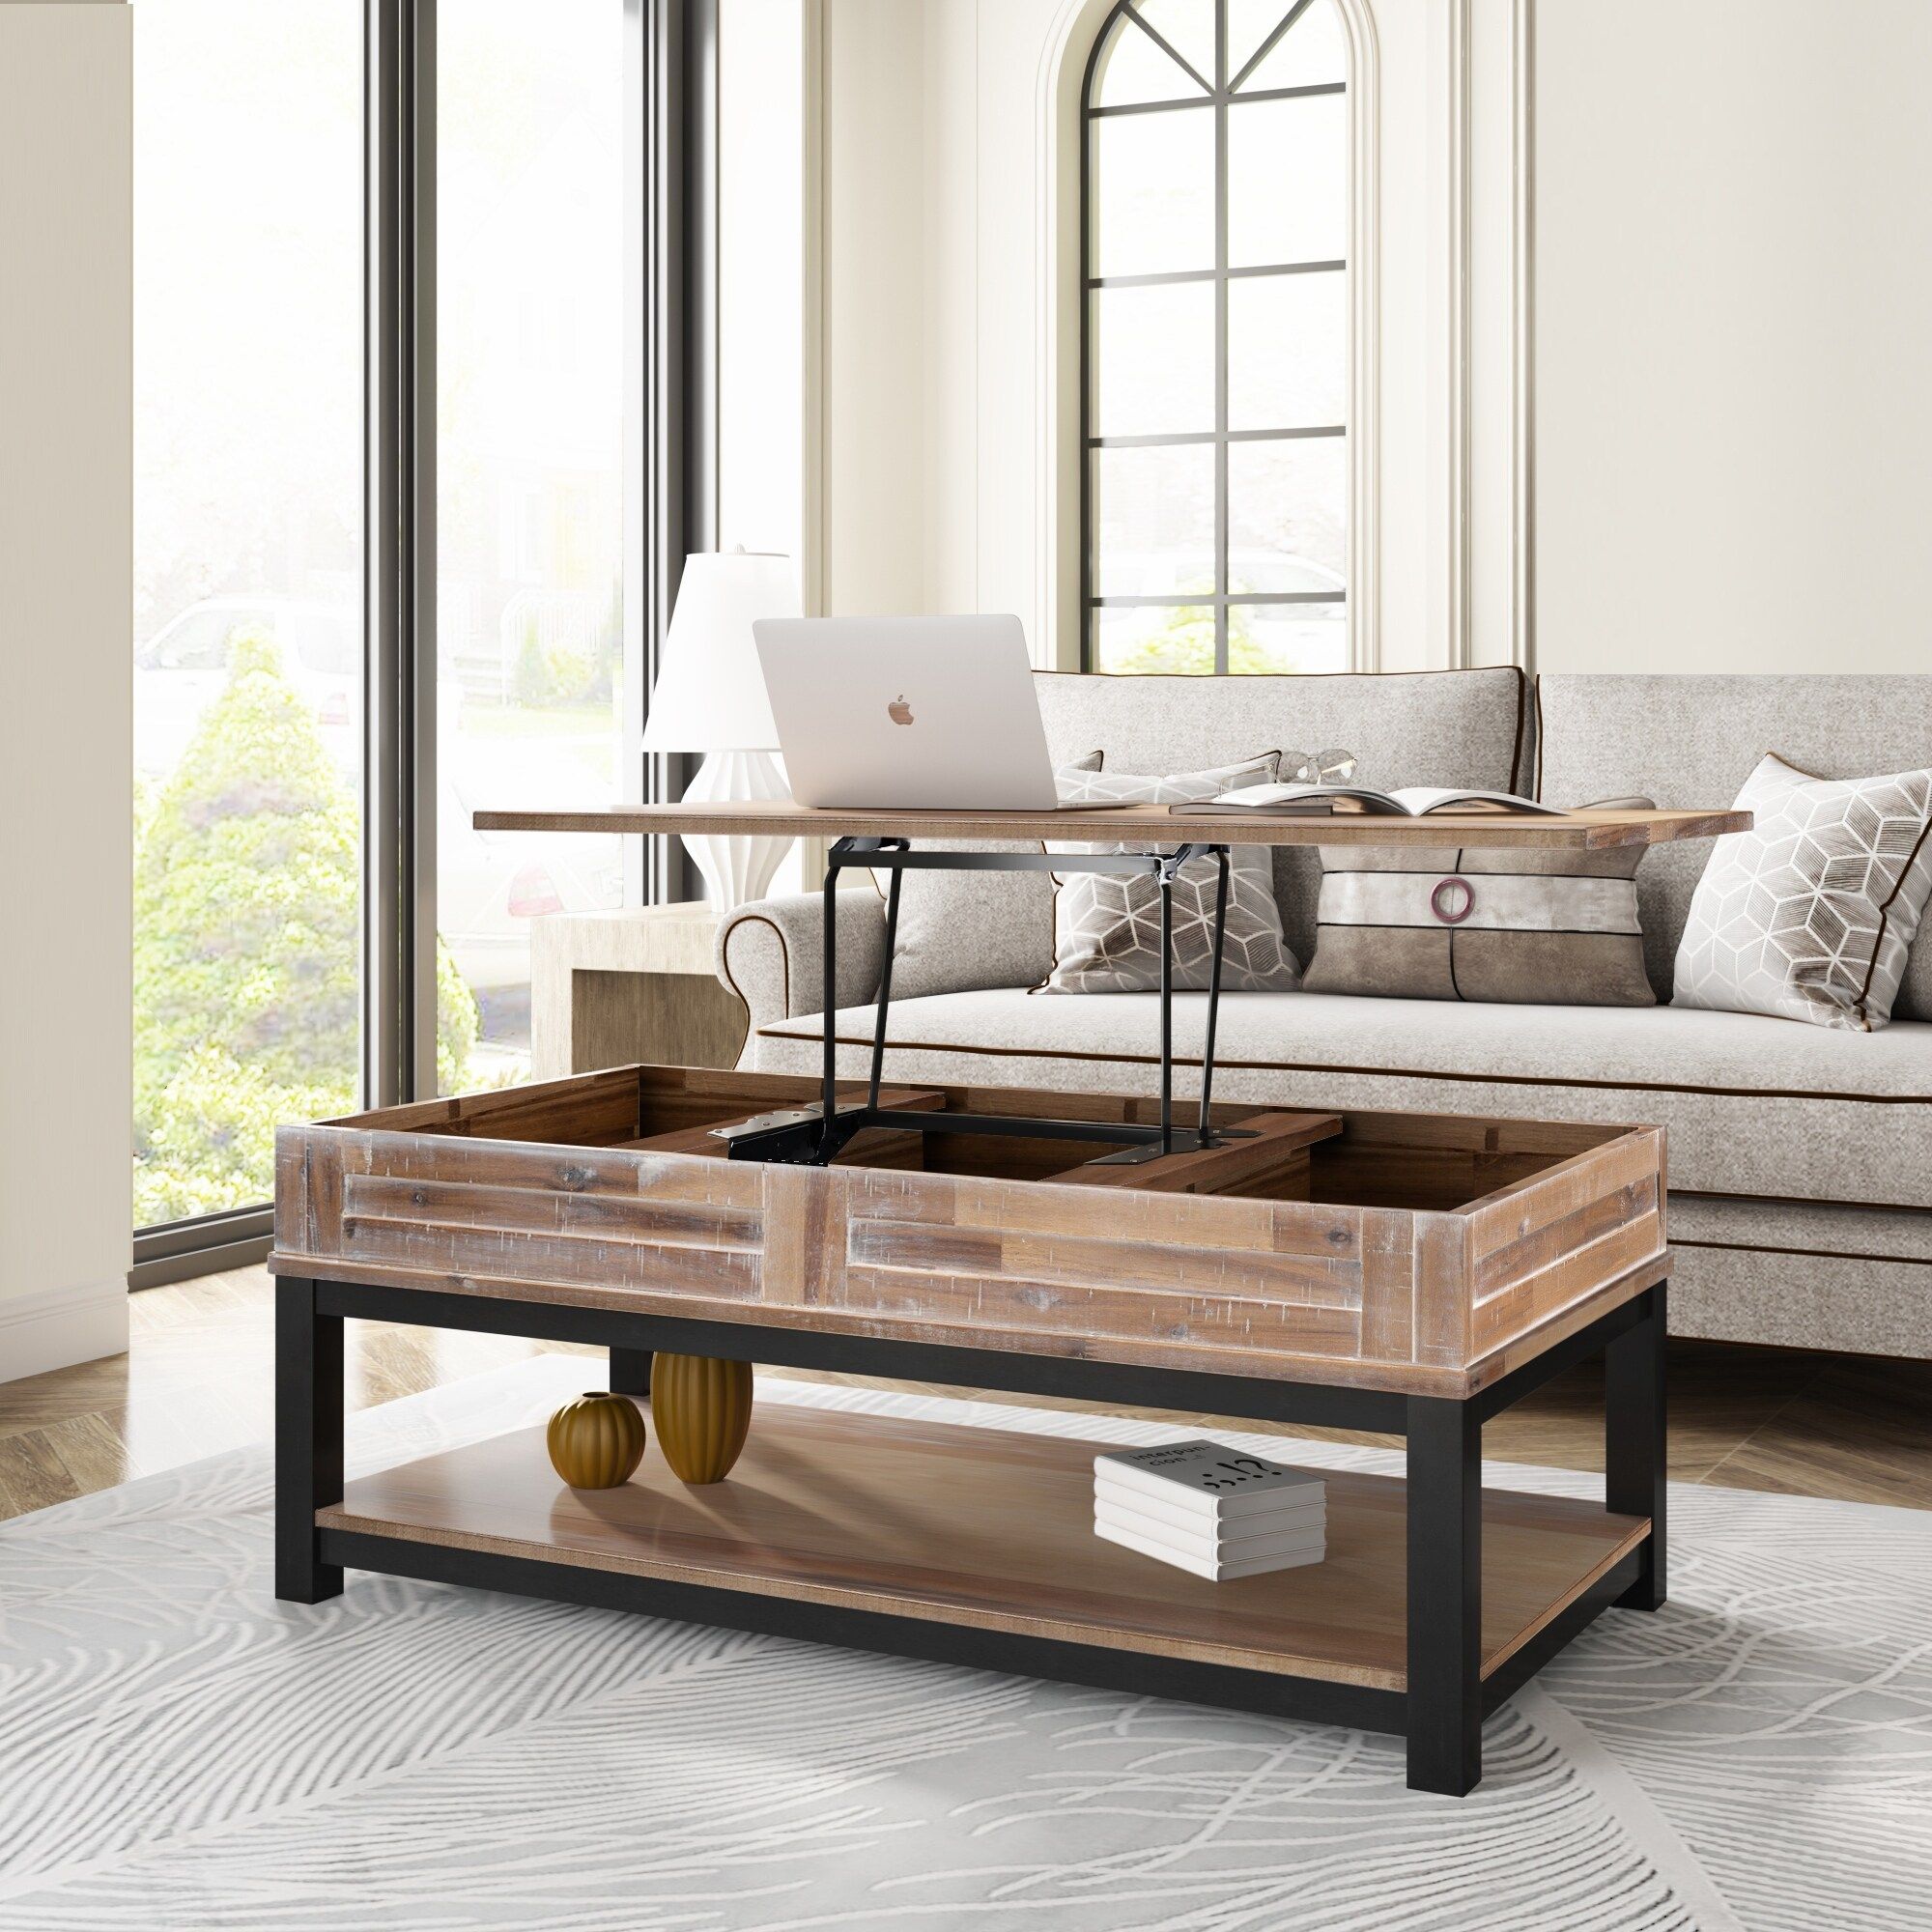 Wooden Lift Top Coffee Table With Inner Storage Space And Shelf – Bed Bath  & Beyond – 36909922 Throughout Wood Lift Top Coffee Tables (View 14 of 15)